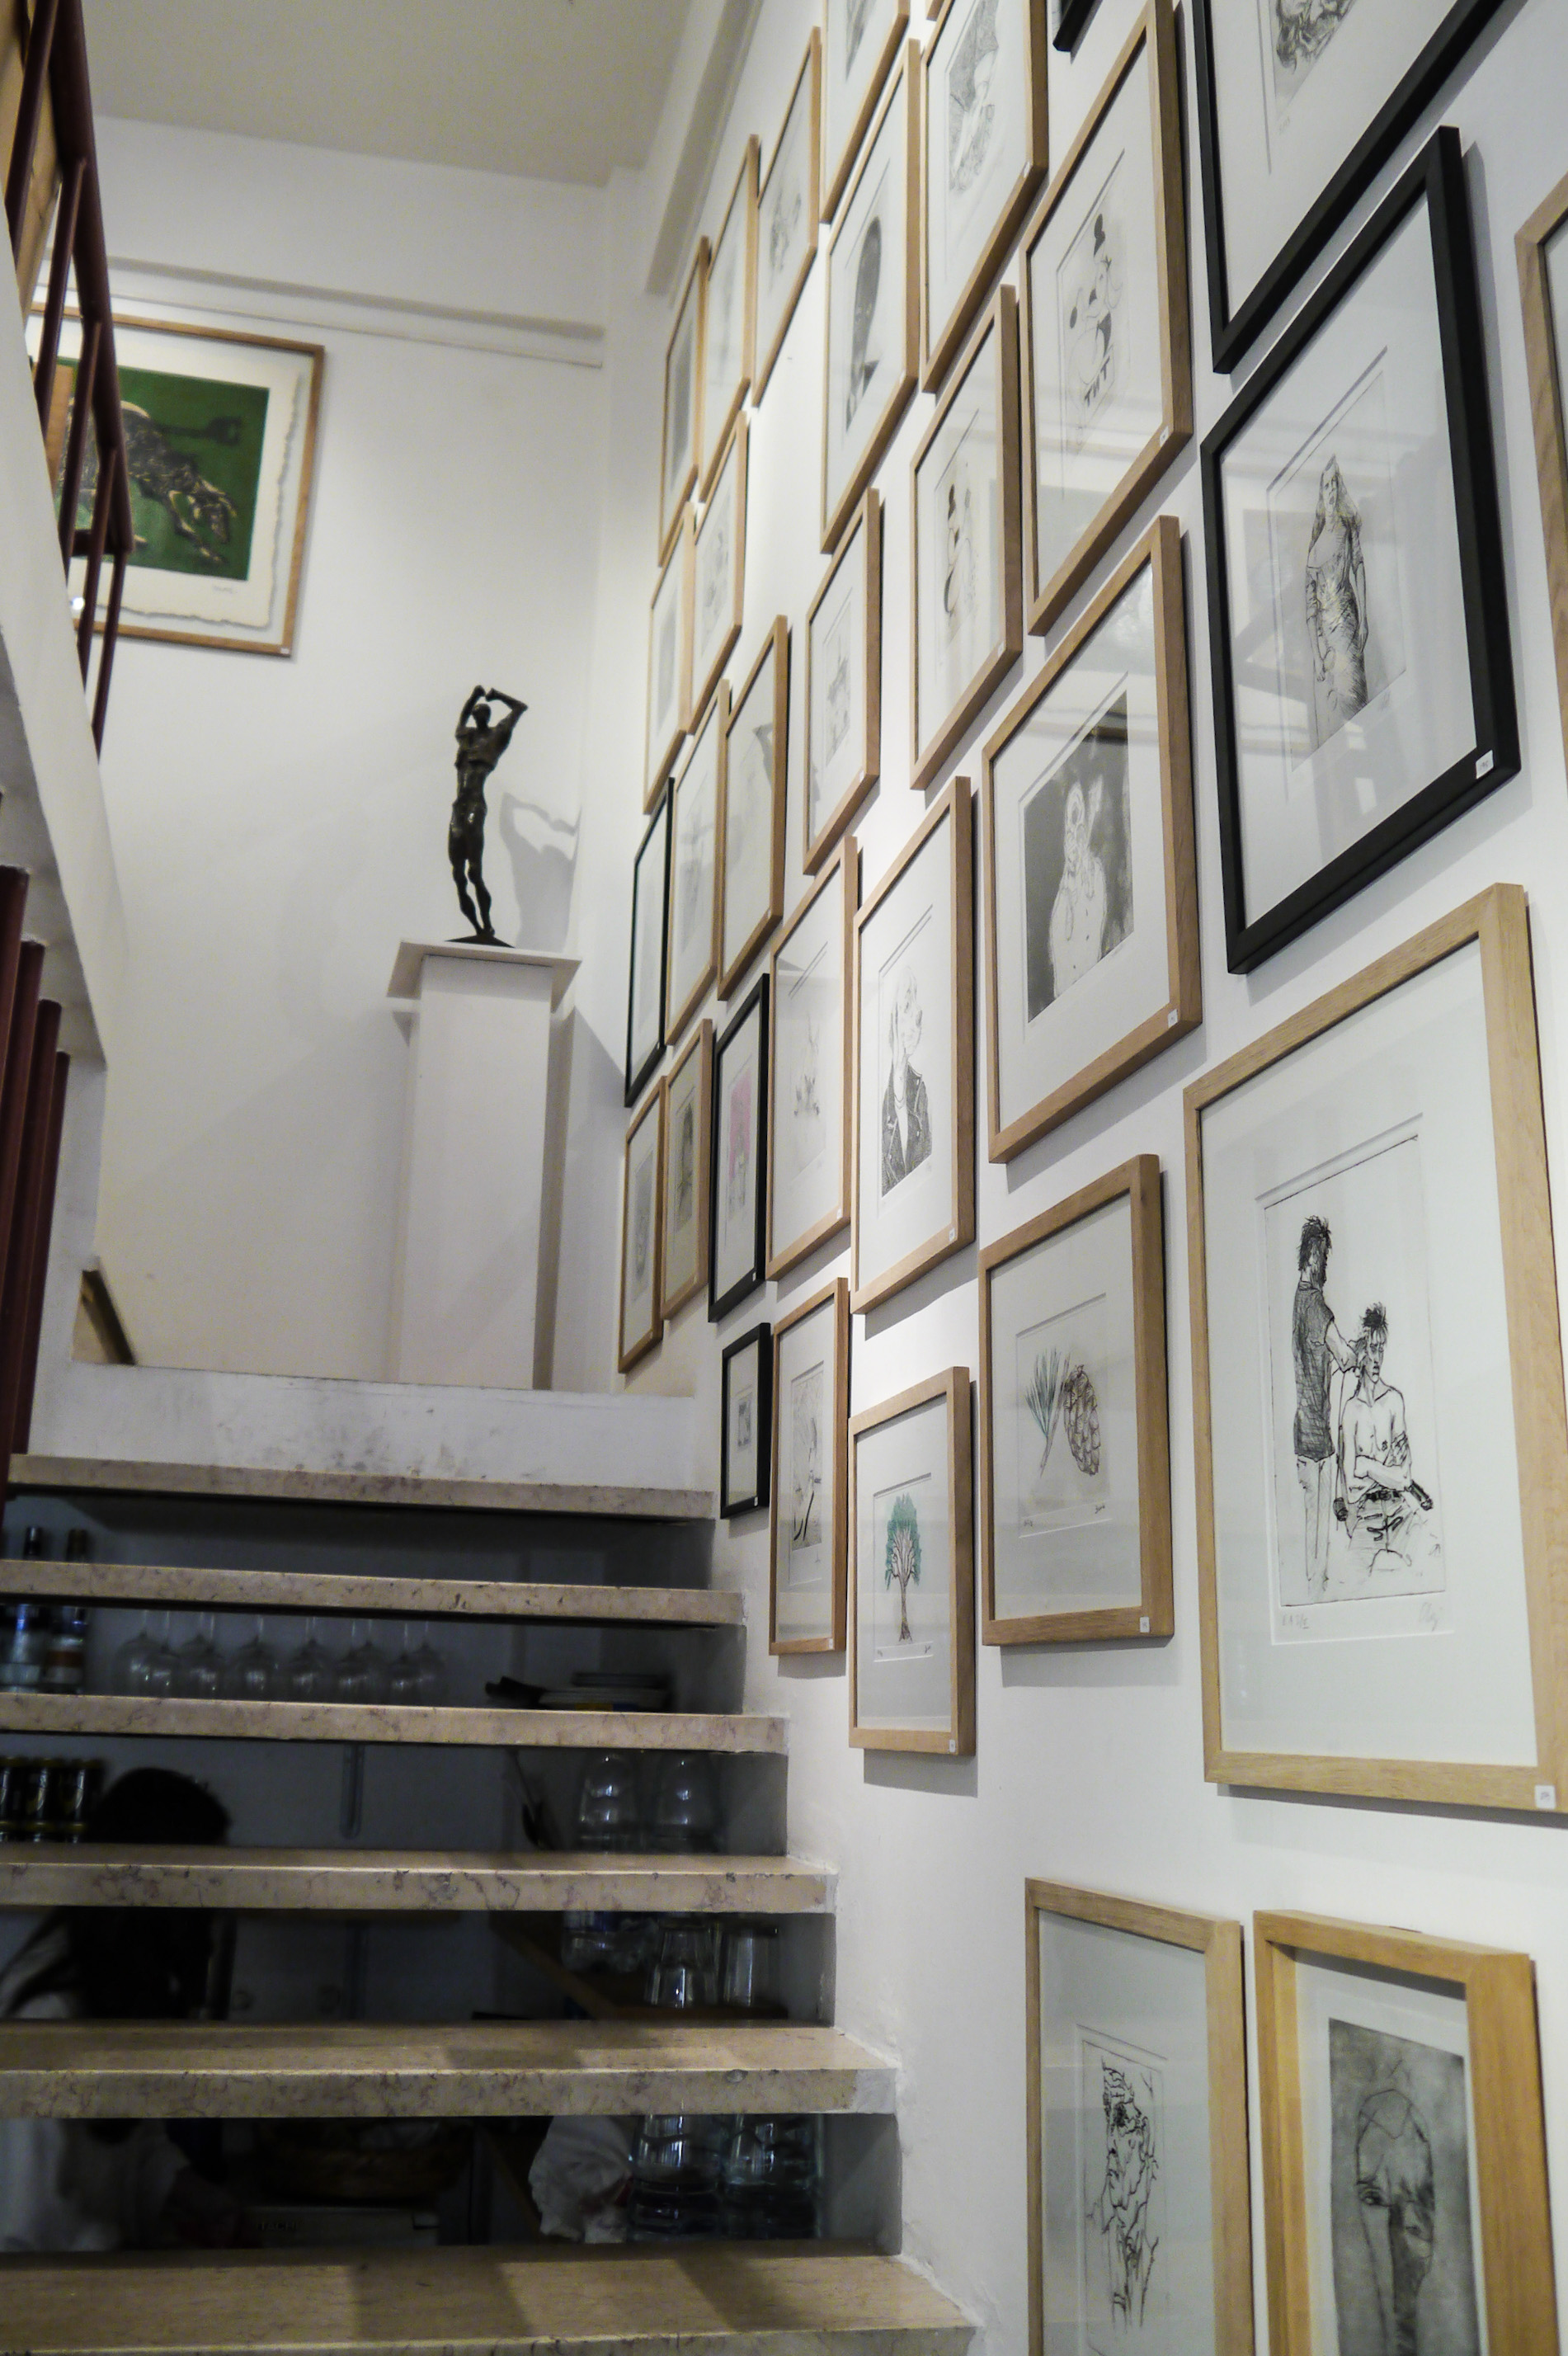 A large selection of etchings made by Lebanese artists lining the walls of Zaarura Gallery